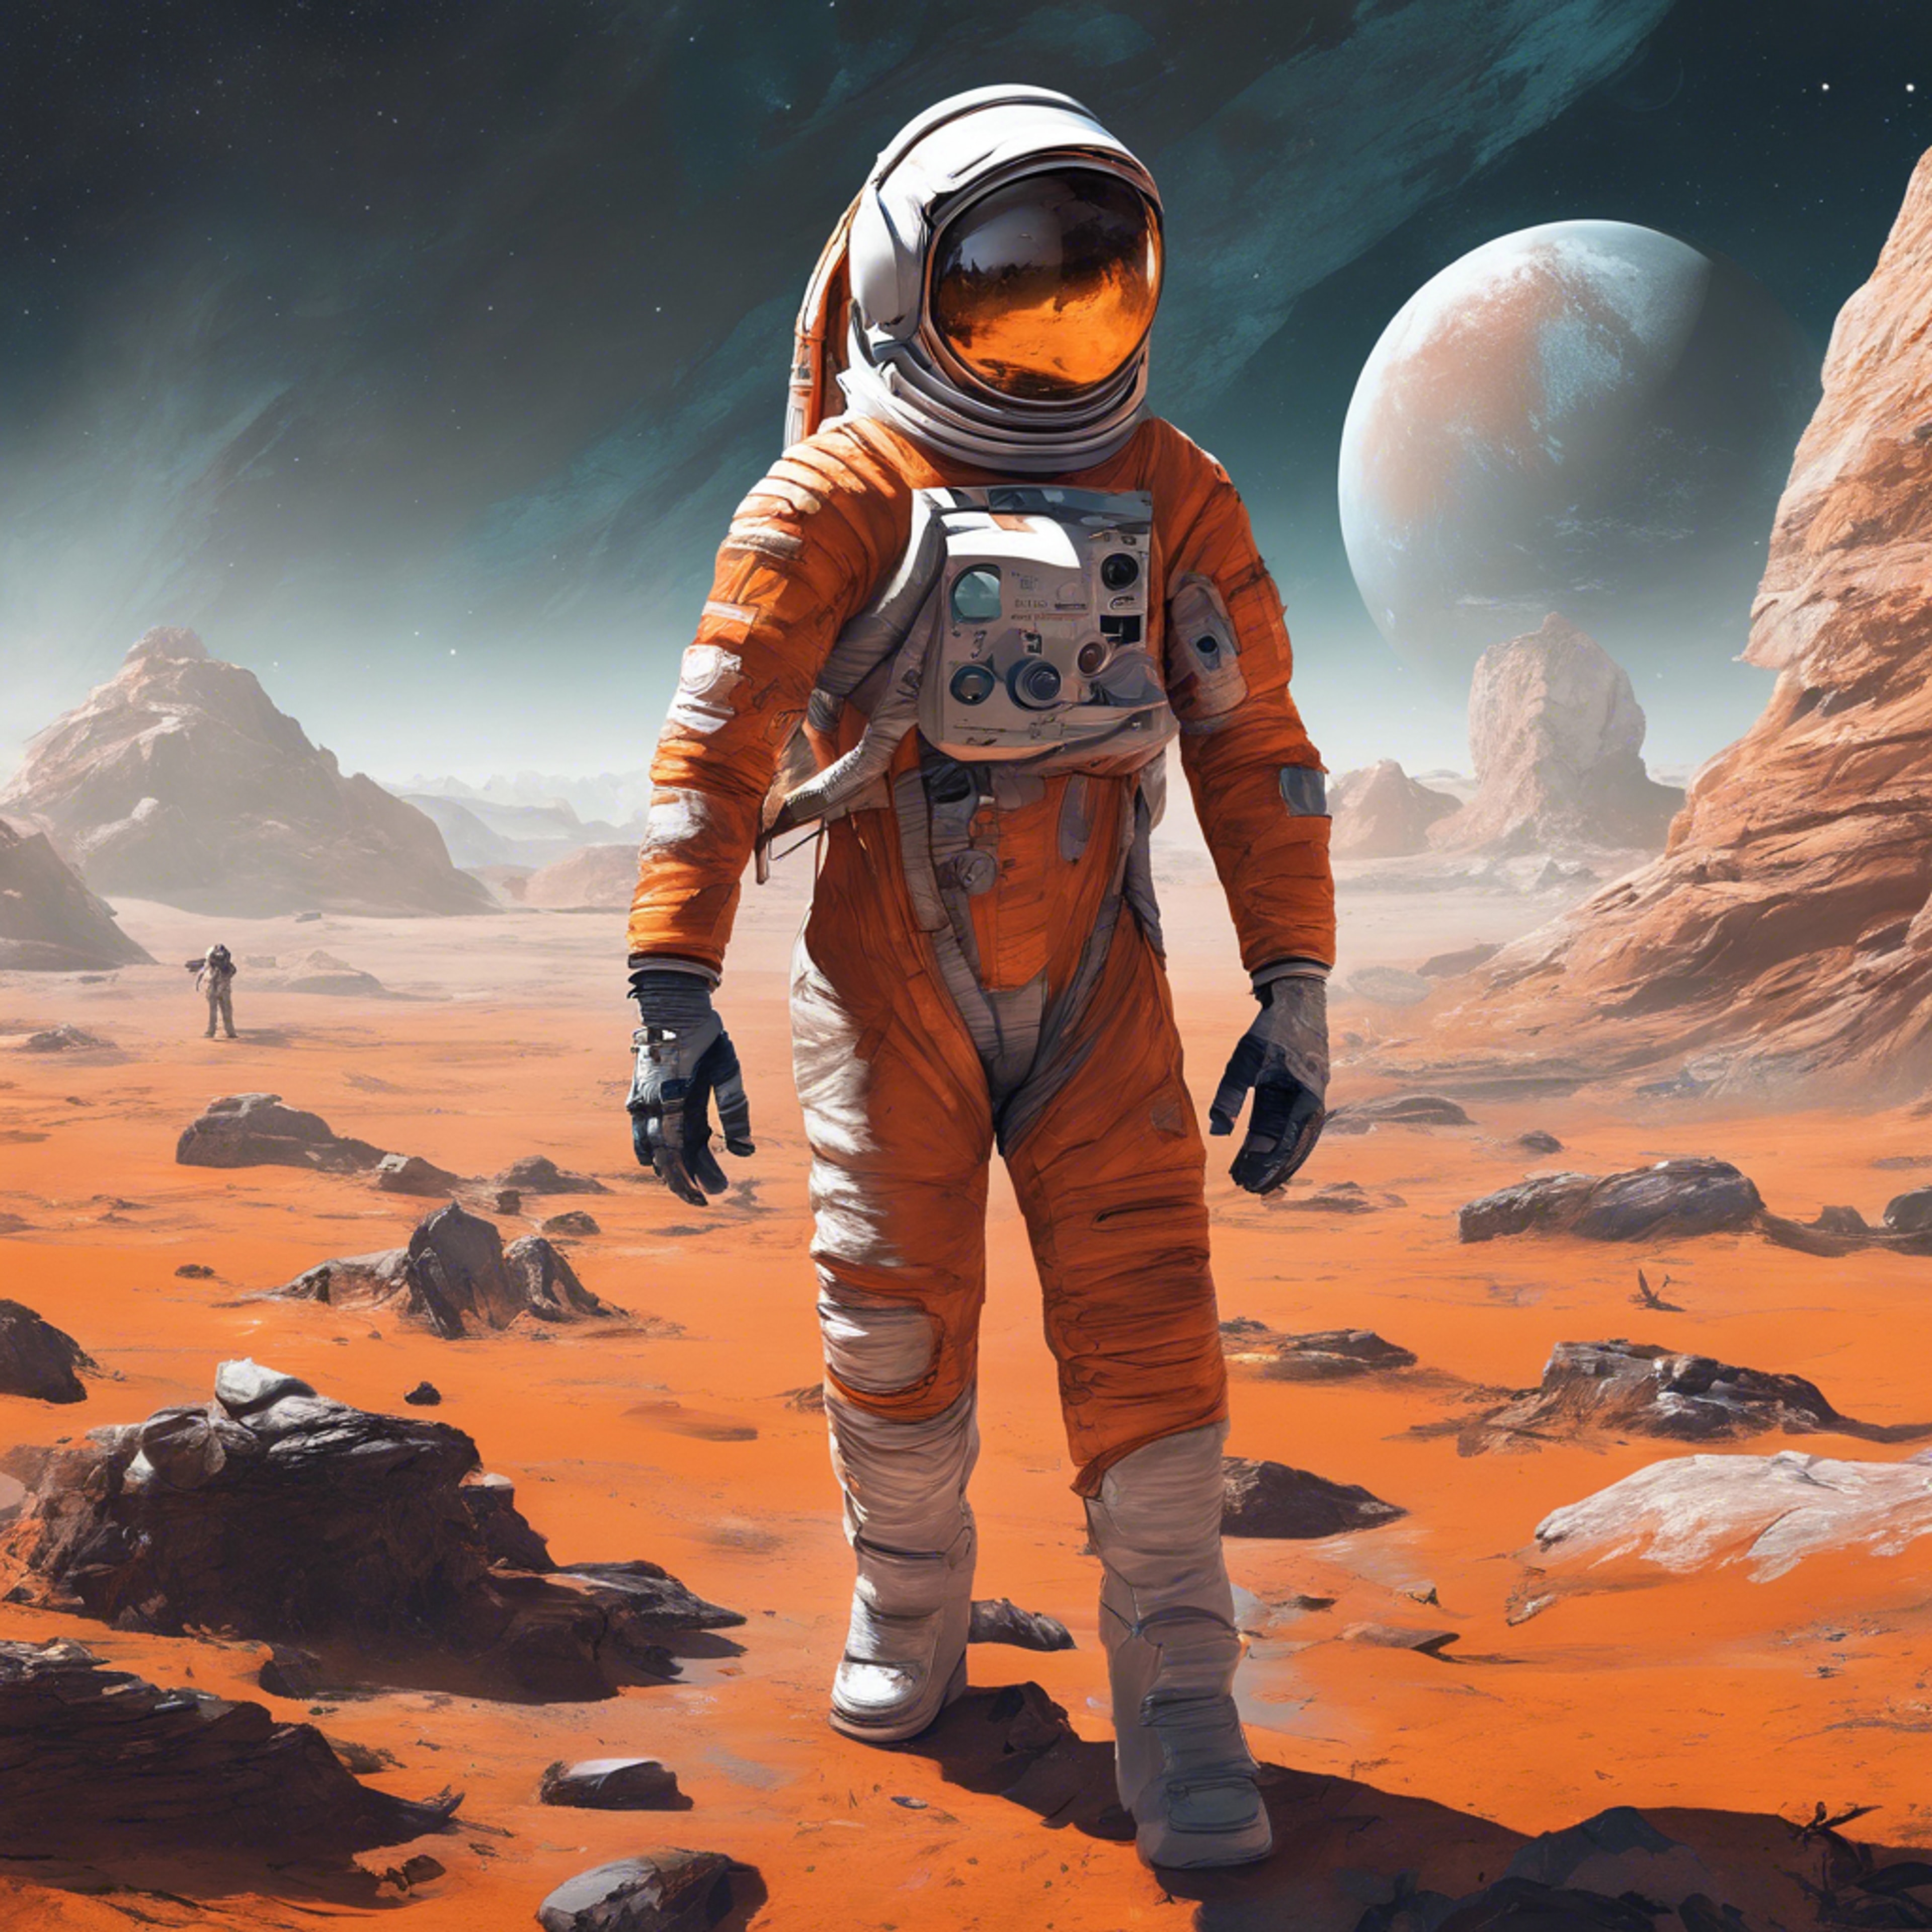 A space-themed video game featuring an astronaut in an orange and white suit exploring an alien planet. Wallpaper[5d2c49abc07a4c83ad01]